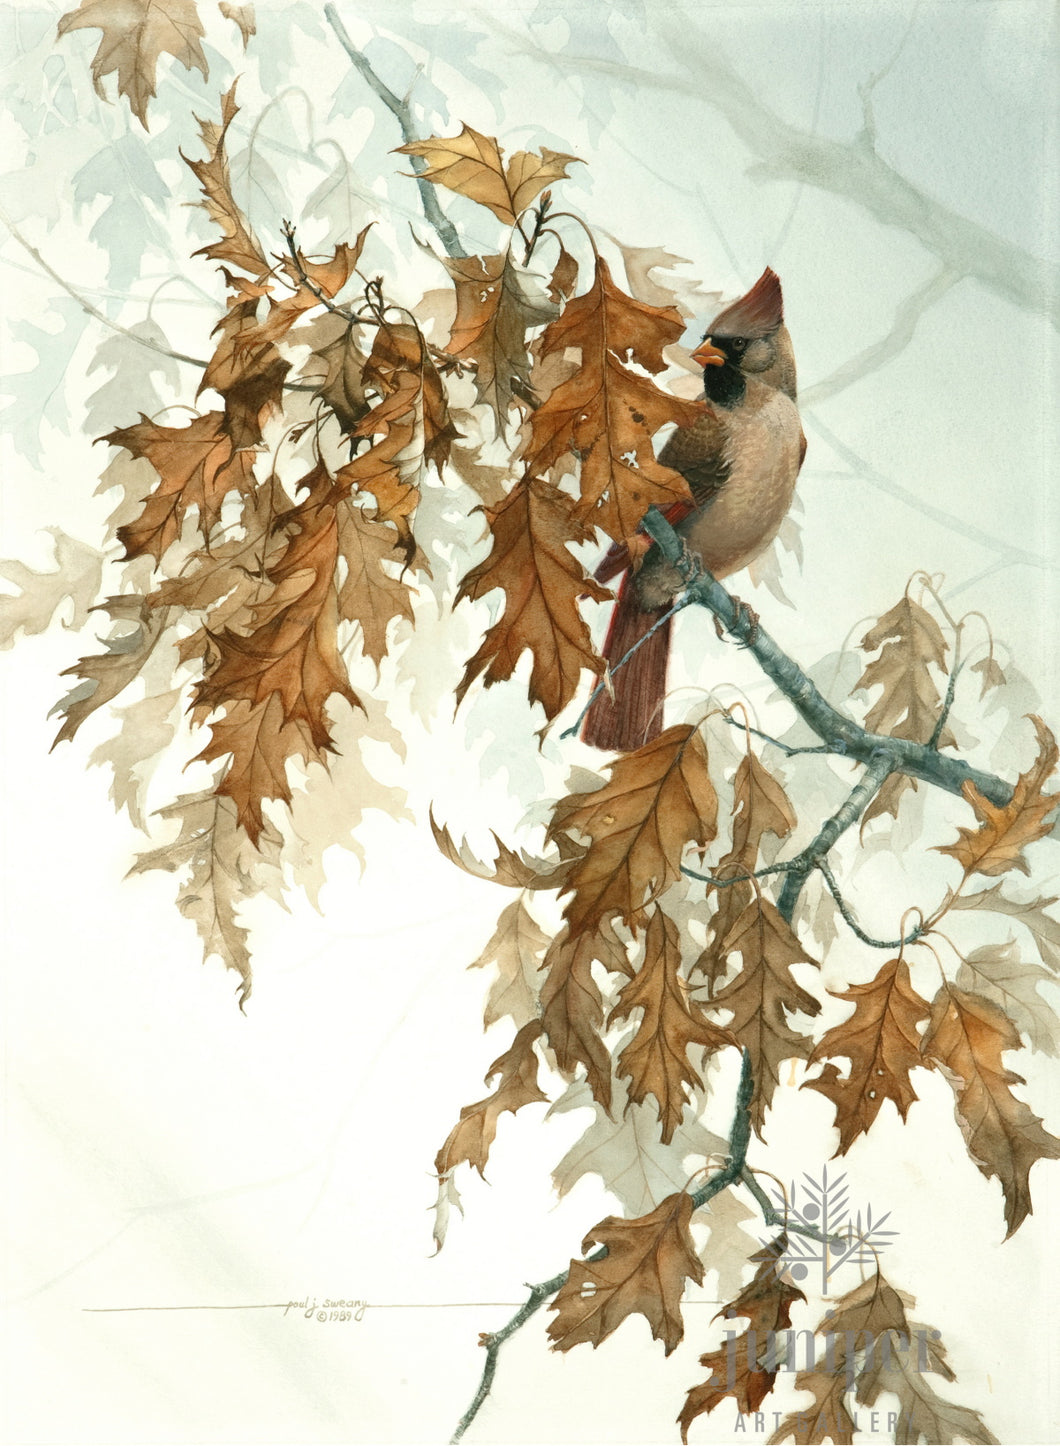 Female Cardinal on Oak Tree, giclee reproduction from original watercolor (1989) by Paul J Sweany